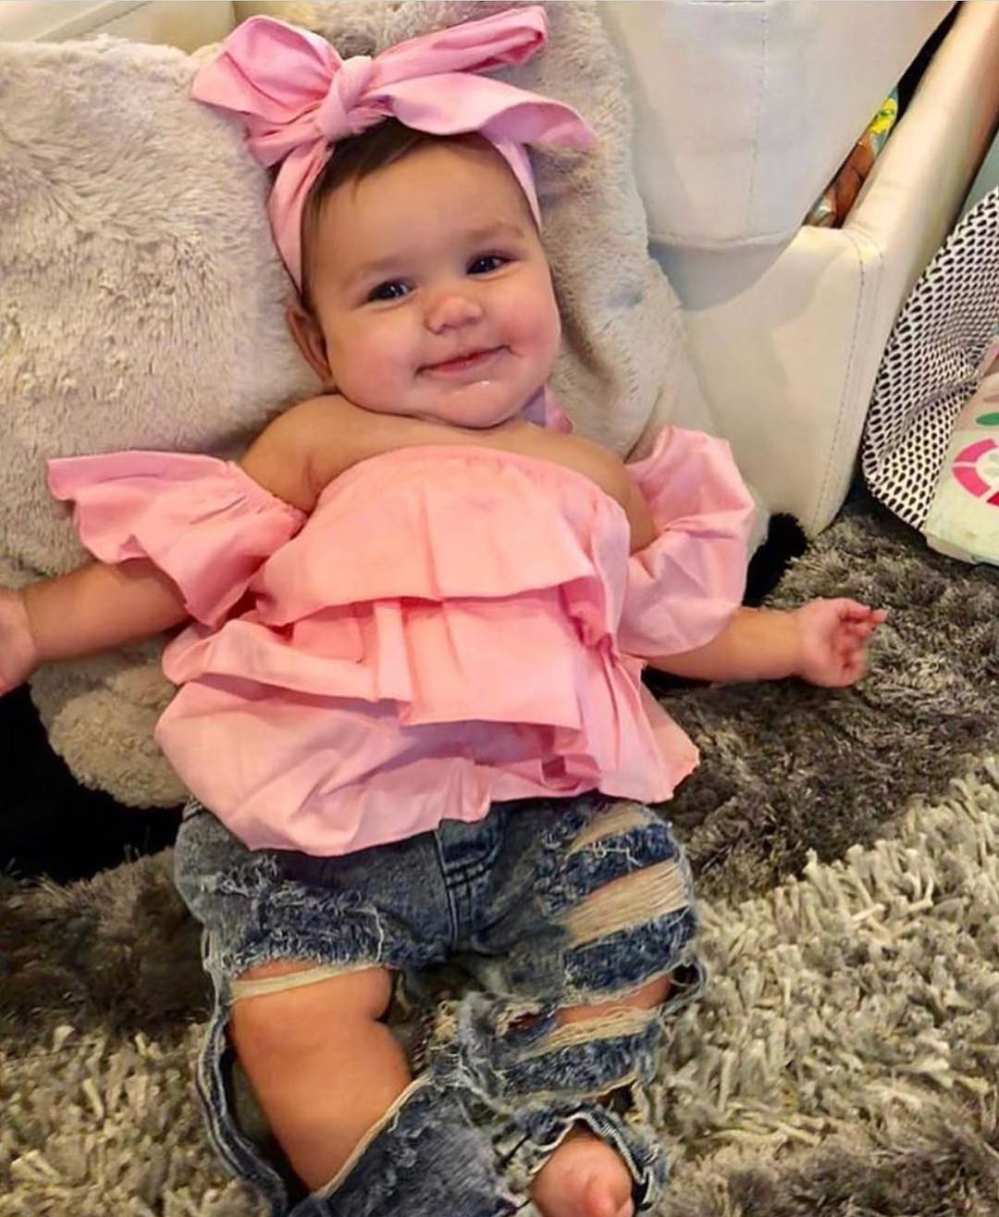 Jersey Shore’s Ronnie Ortiz-Magro Dressed His Daughter in ‘Potentially Dangerous’ Ripped Jeans